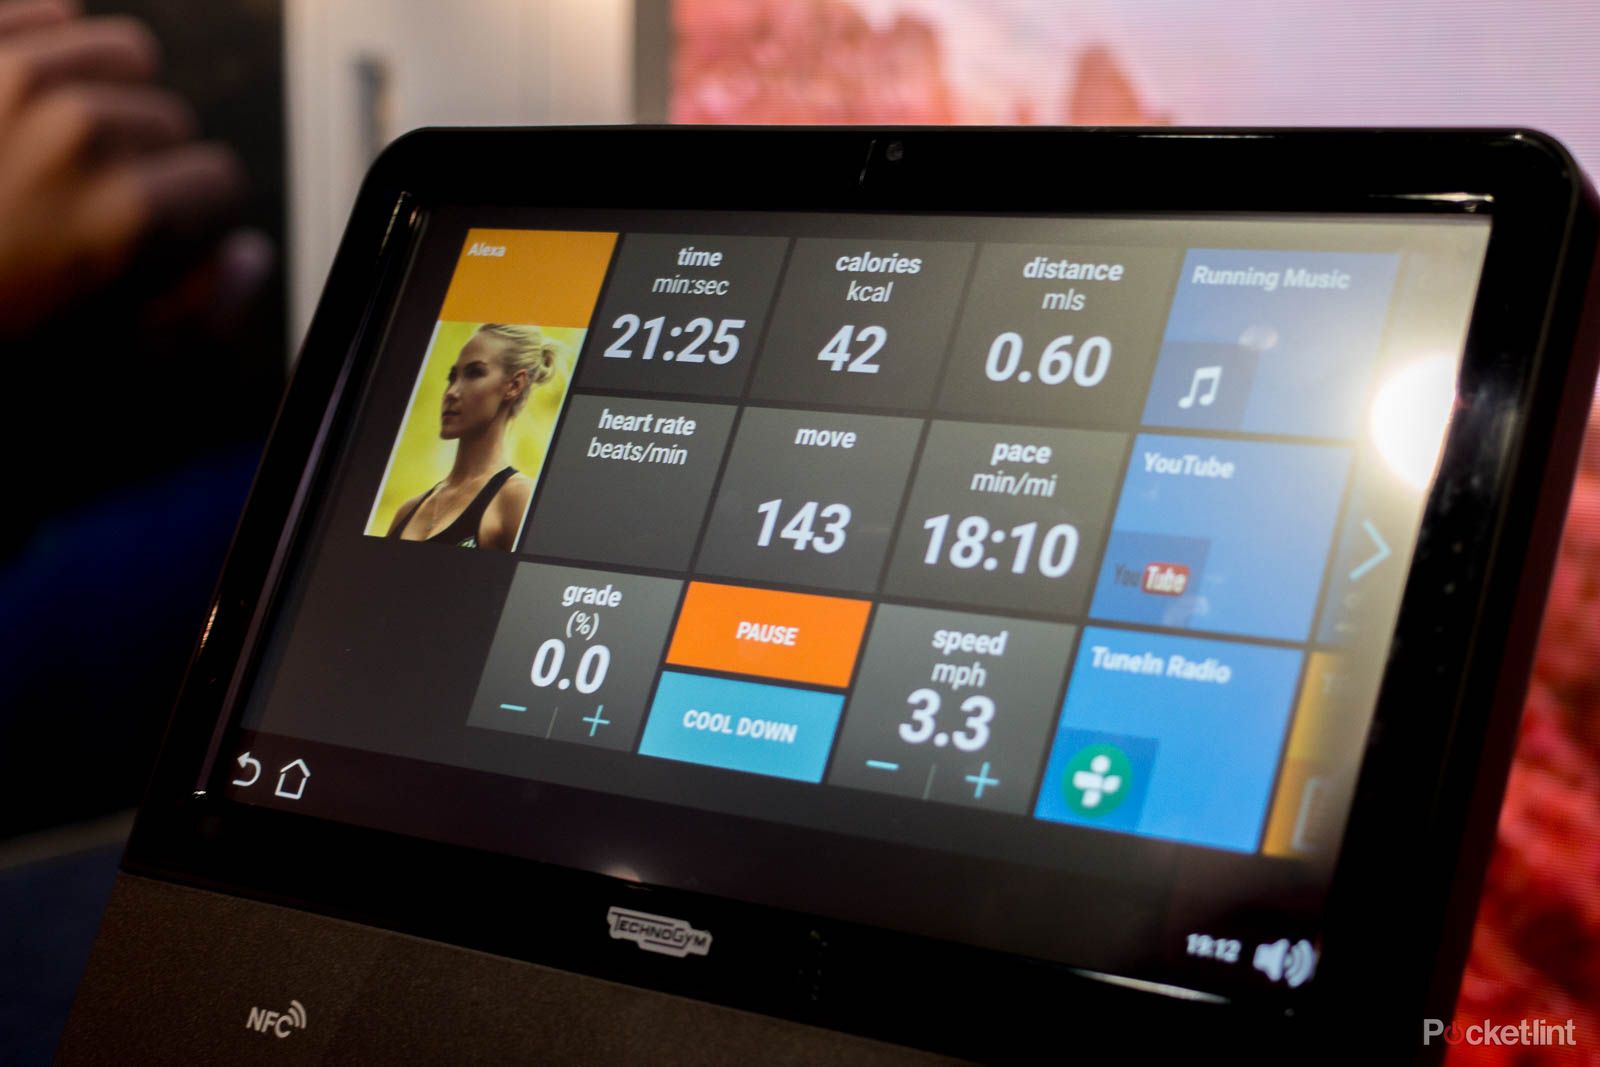 music based treadmill changes tune as you run image 2